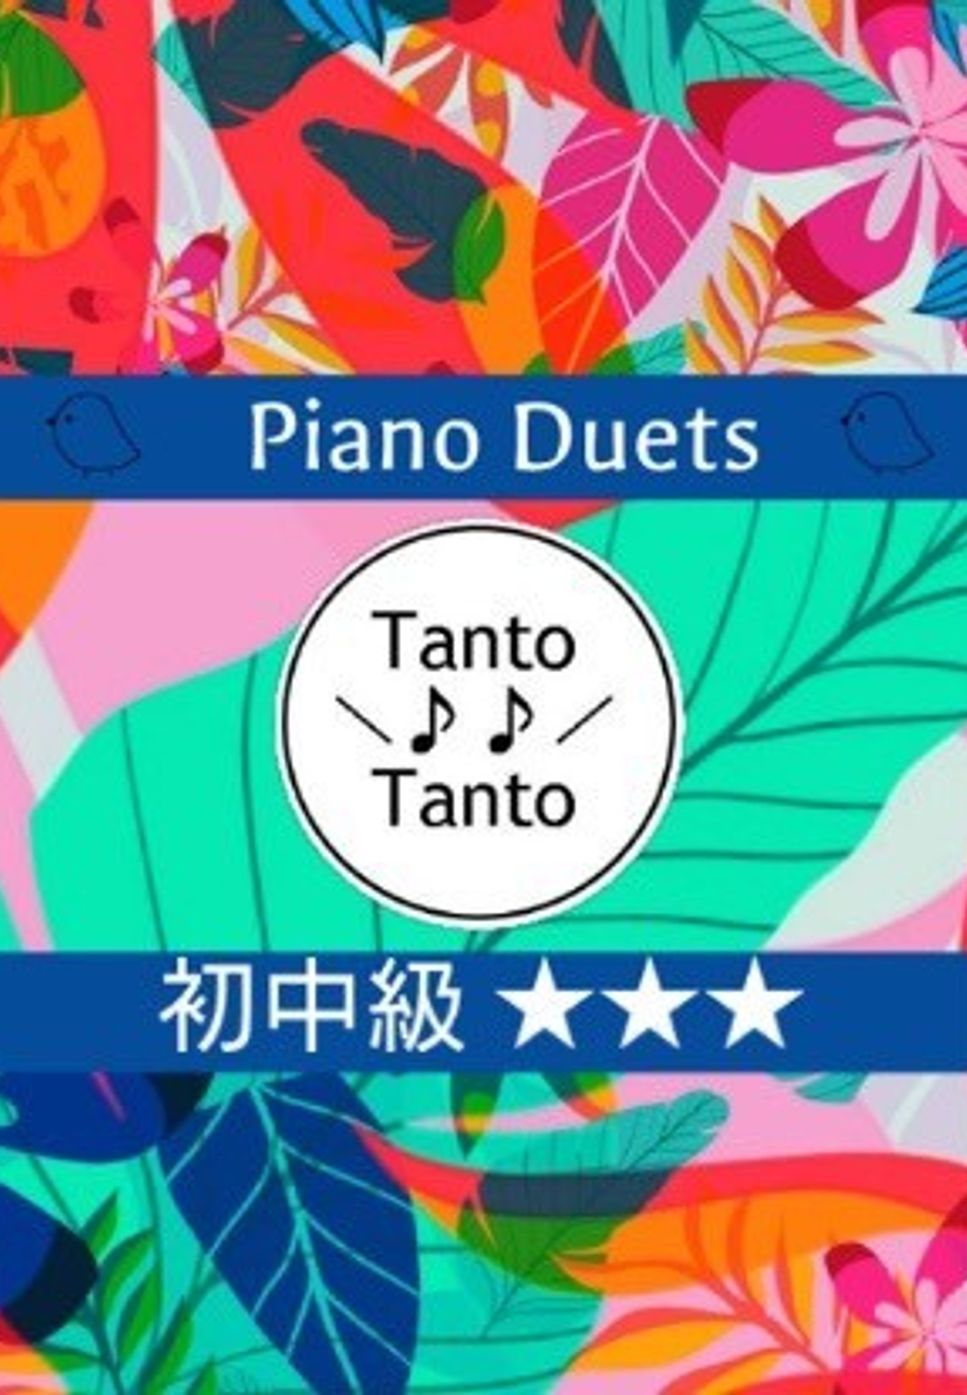 Jazzy きらきら星 Twinkle Twinkle Little Star (初中級 3手連弾 Piano Duets 3Hands in C) by Tanto Tanto